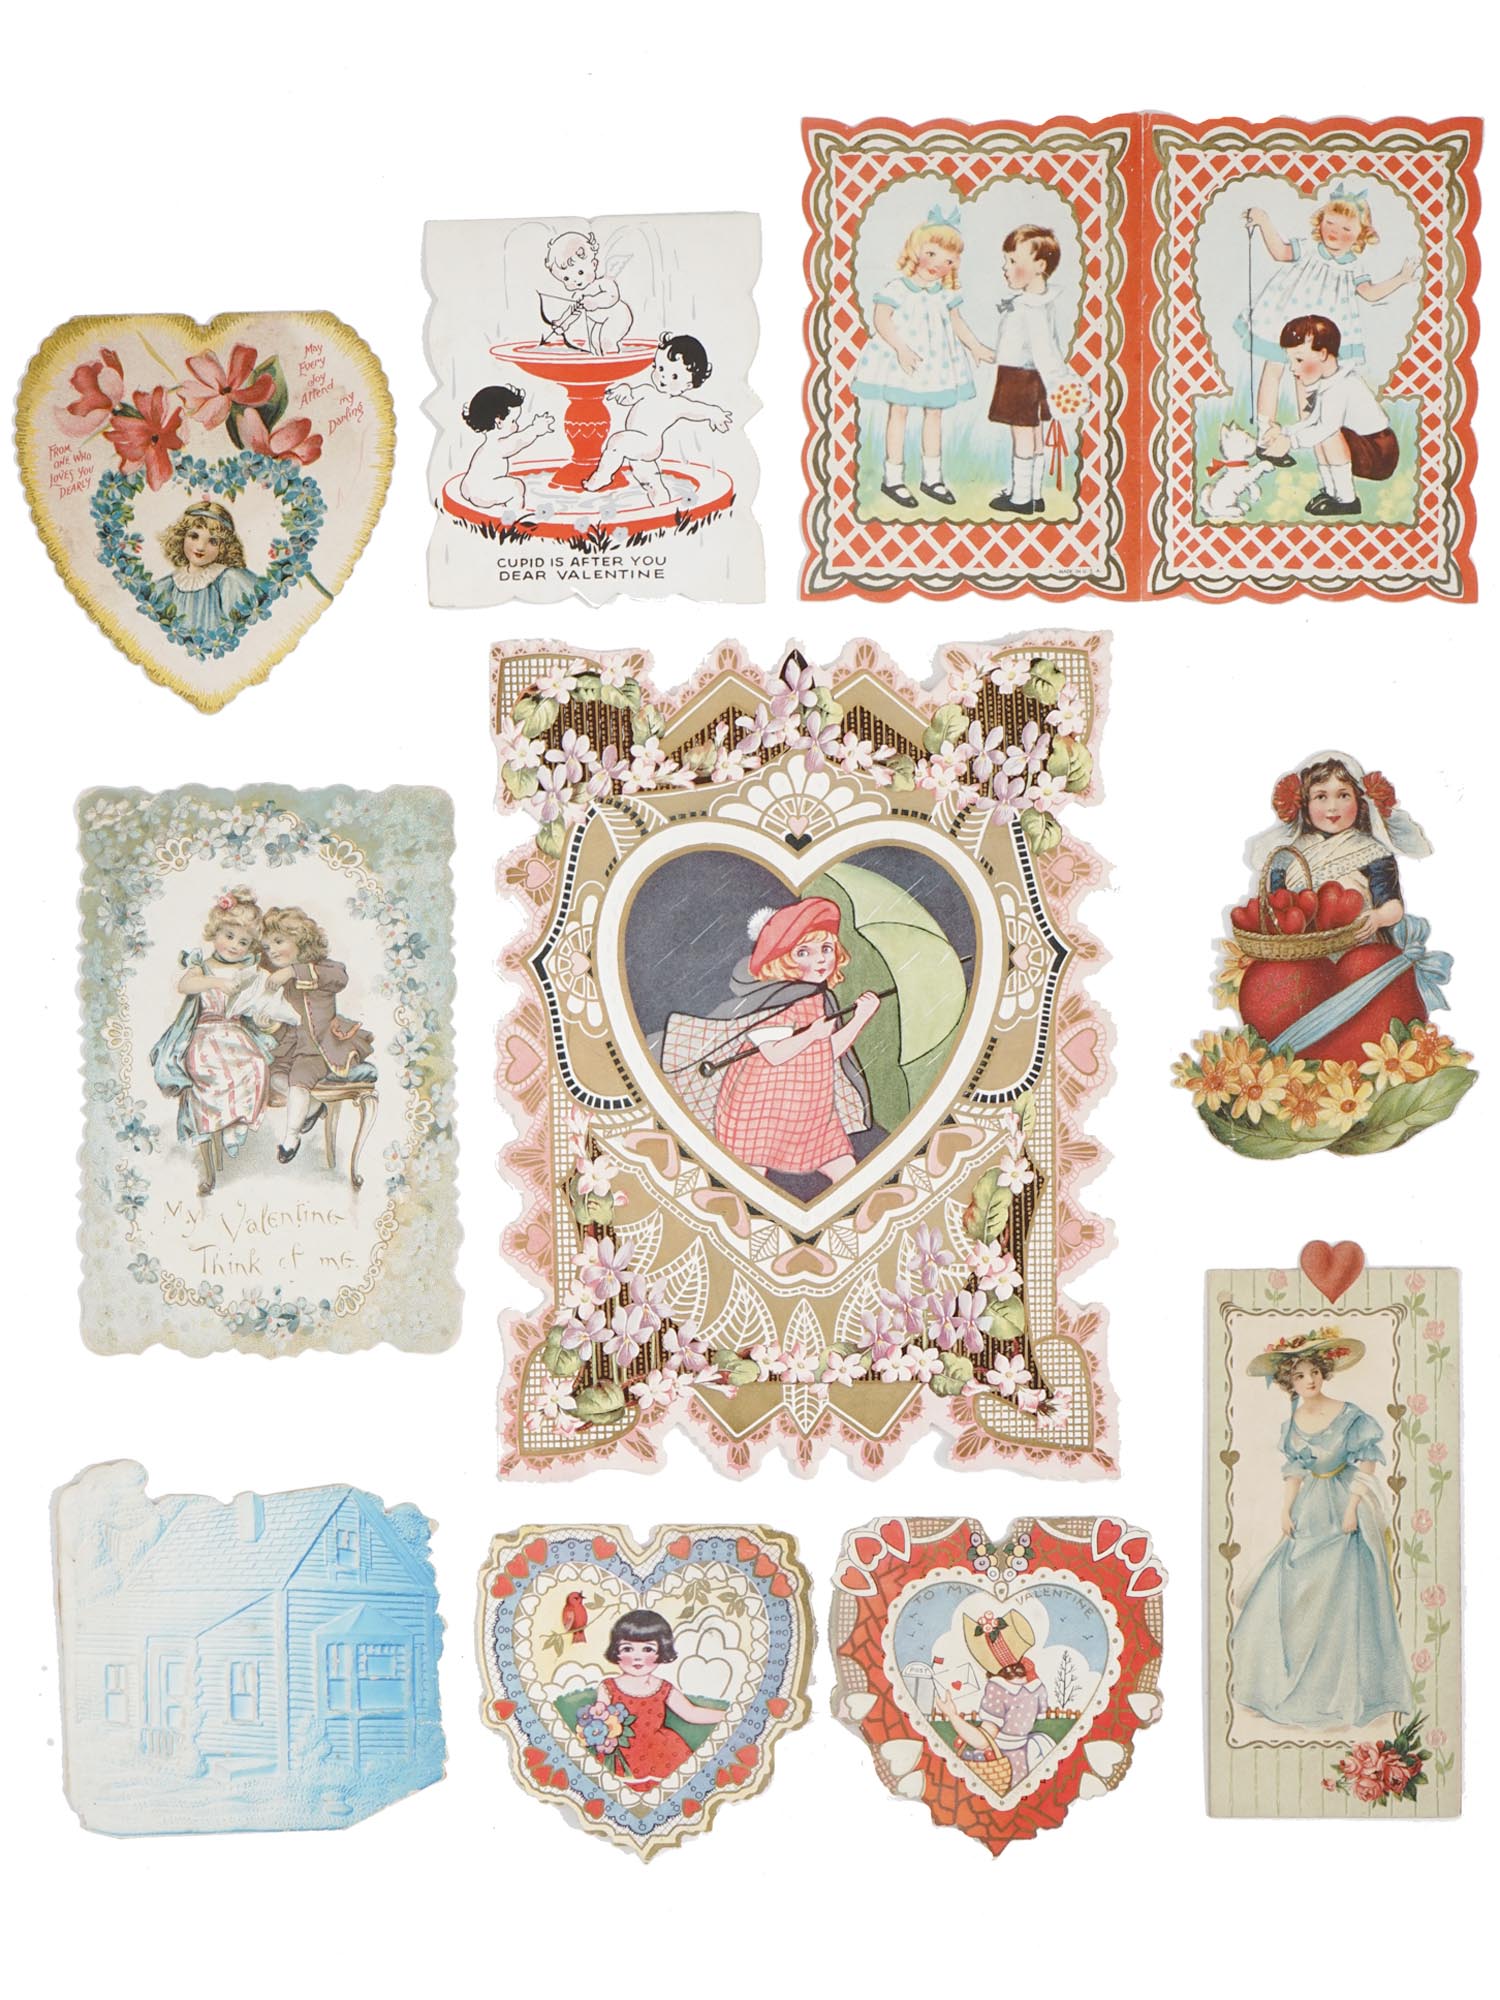 ANTIQUE VALENTINES DAY CARDS COLLECTION IN ALBUM PIC-5